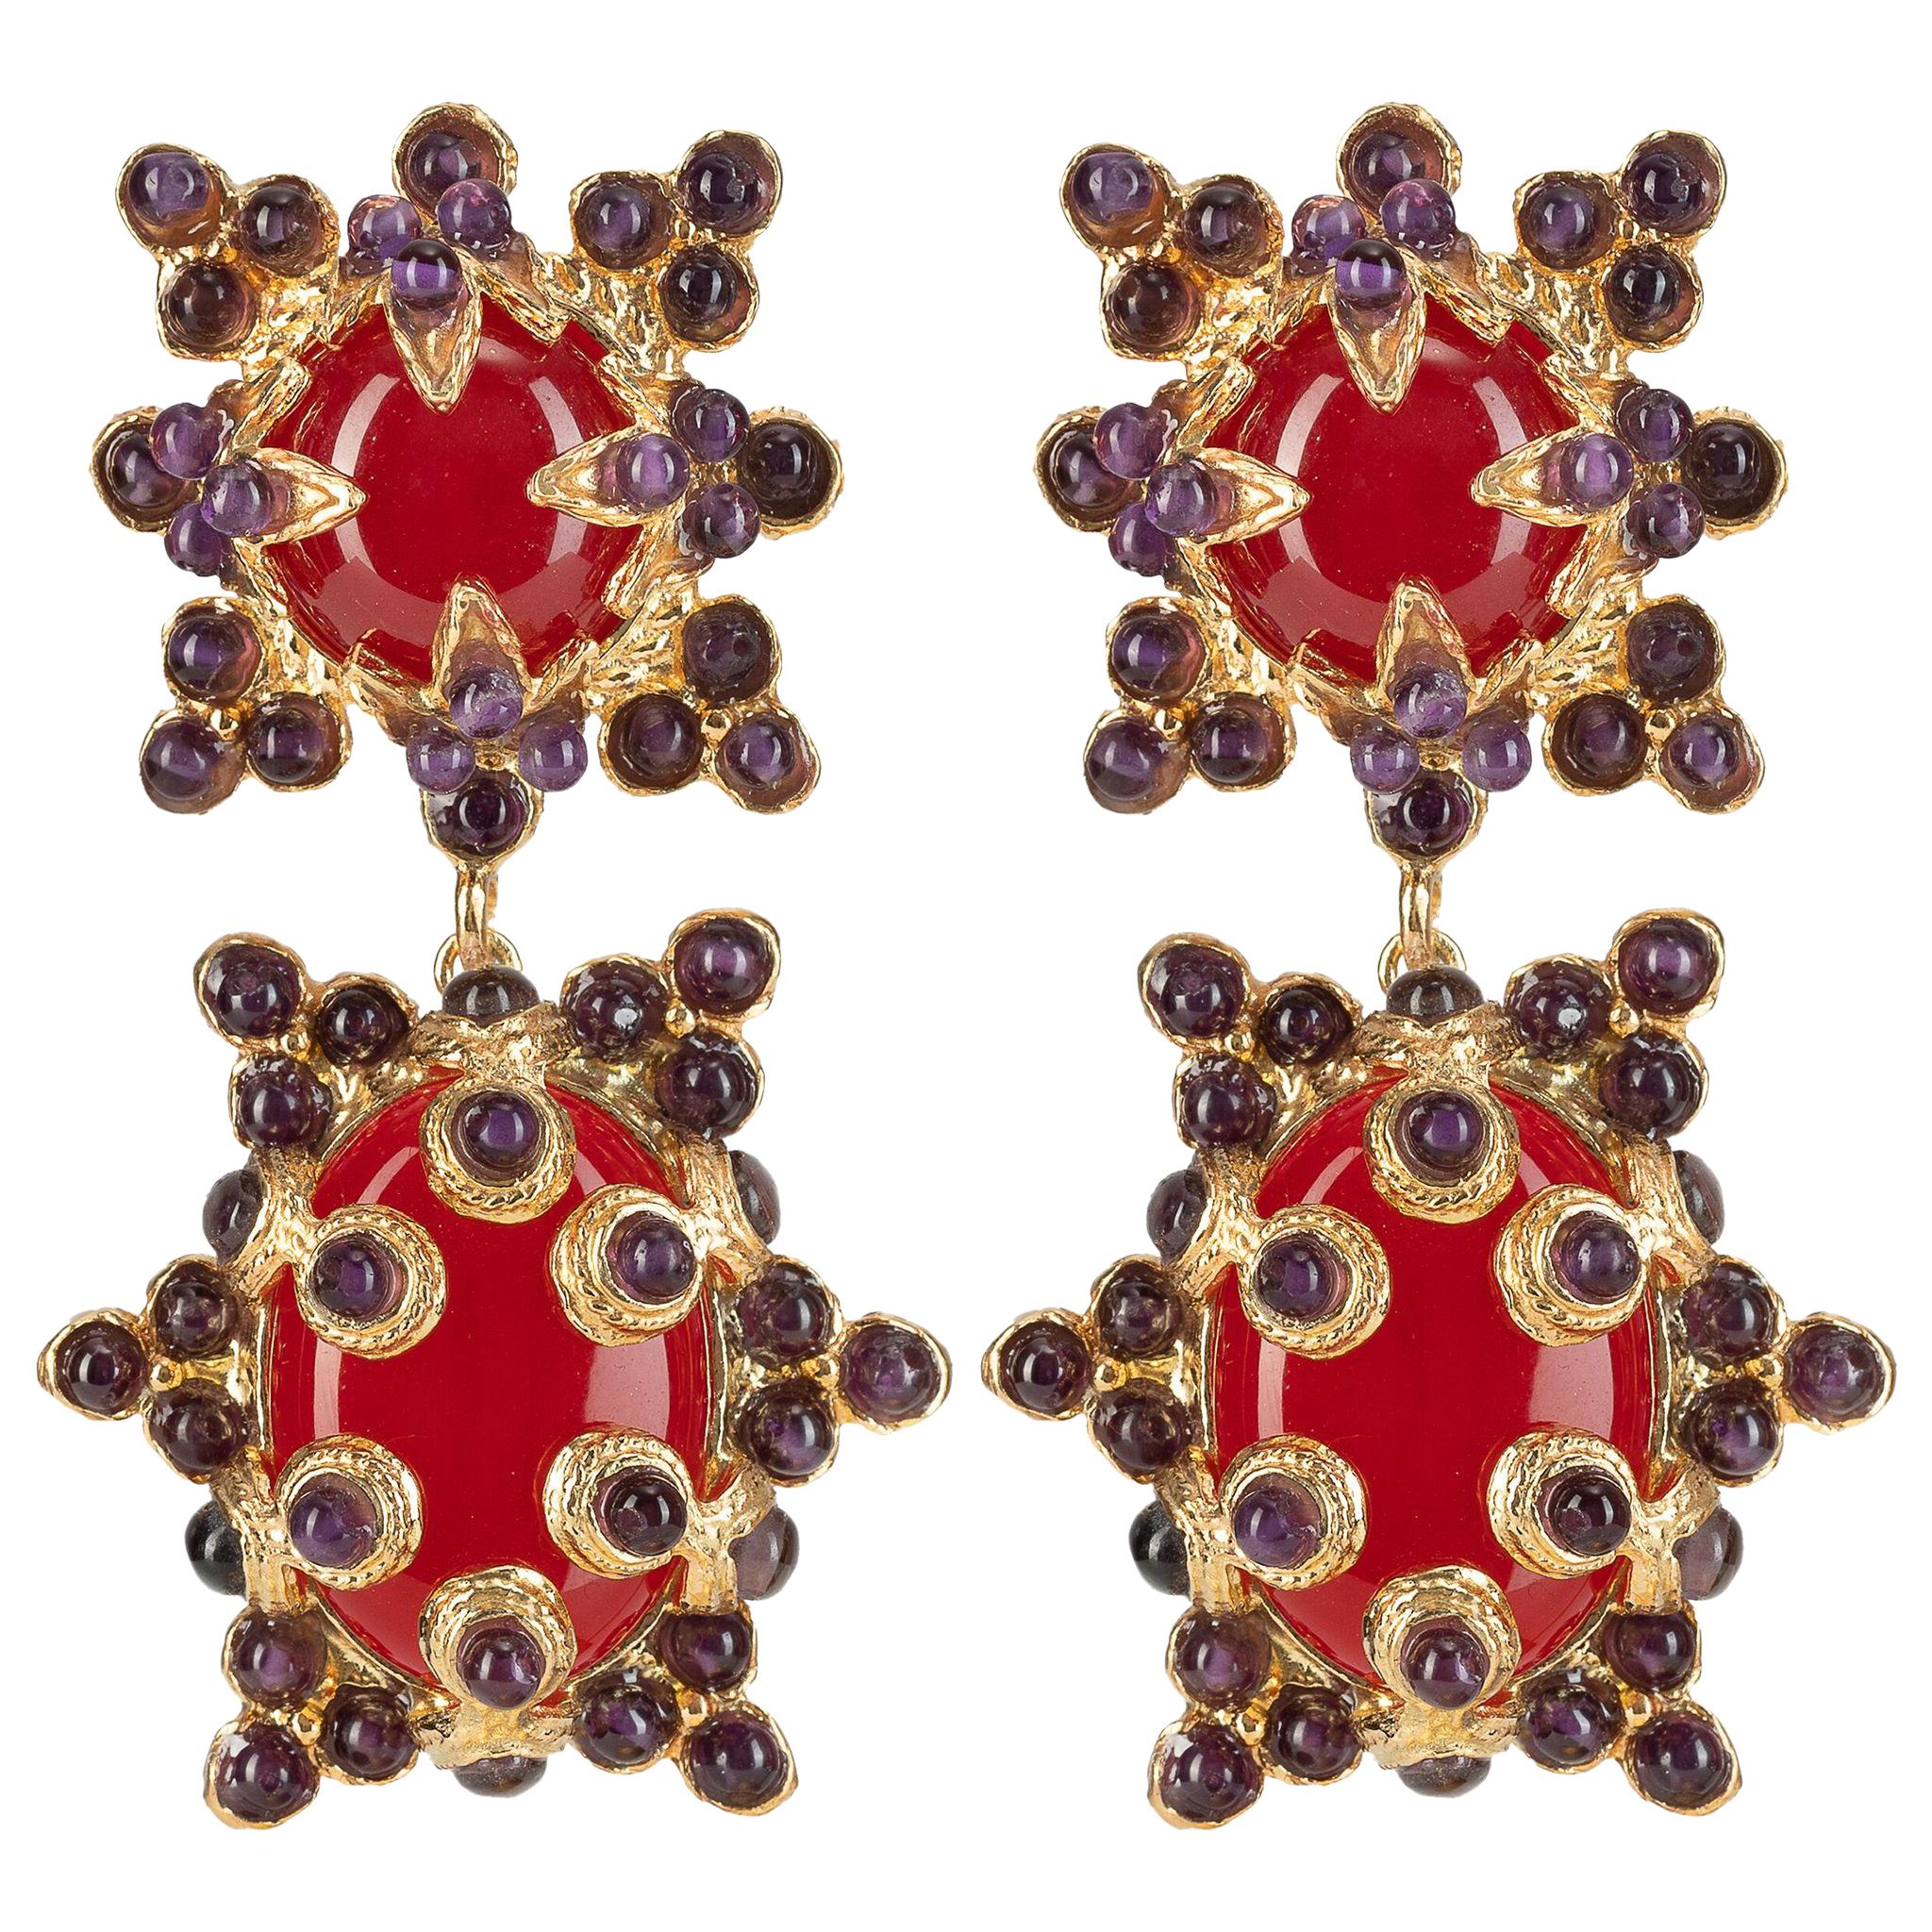 Christie Nicolaides Lucia Earrings in Gold with Jade with Amethyst